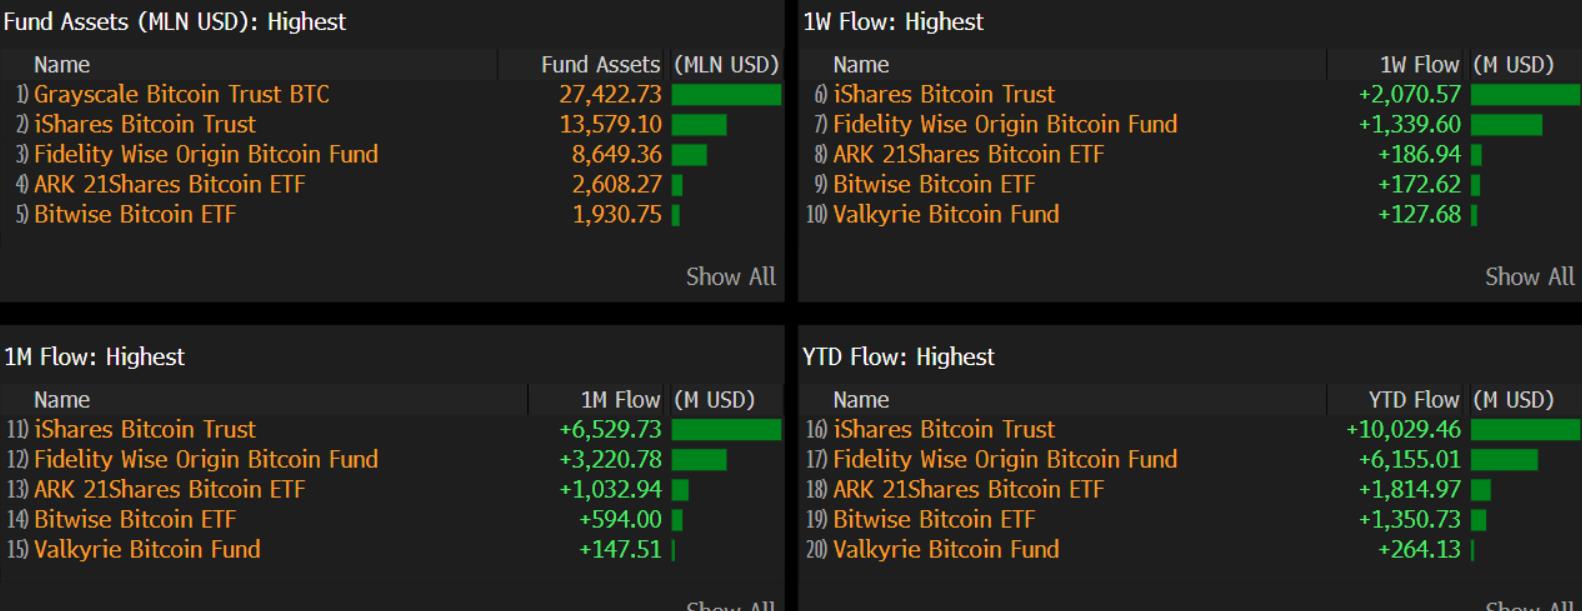 Bitcoin rises to another record, $72,000 and ETFs flows surge, again